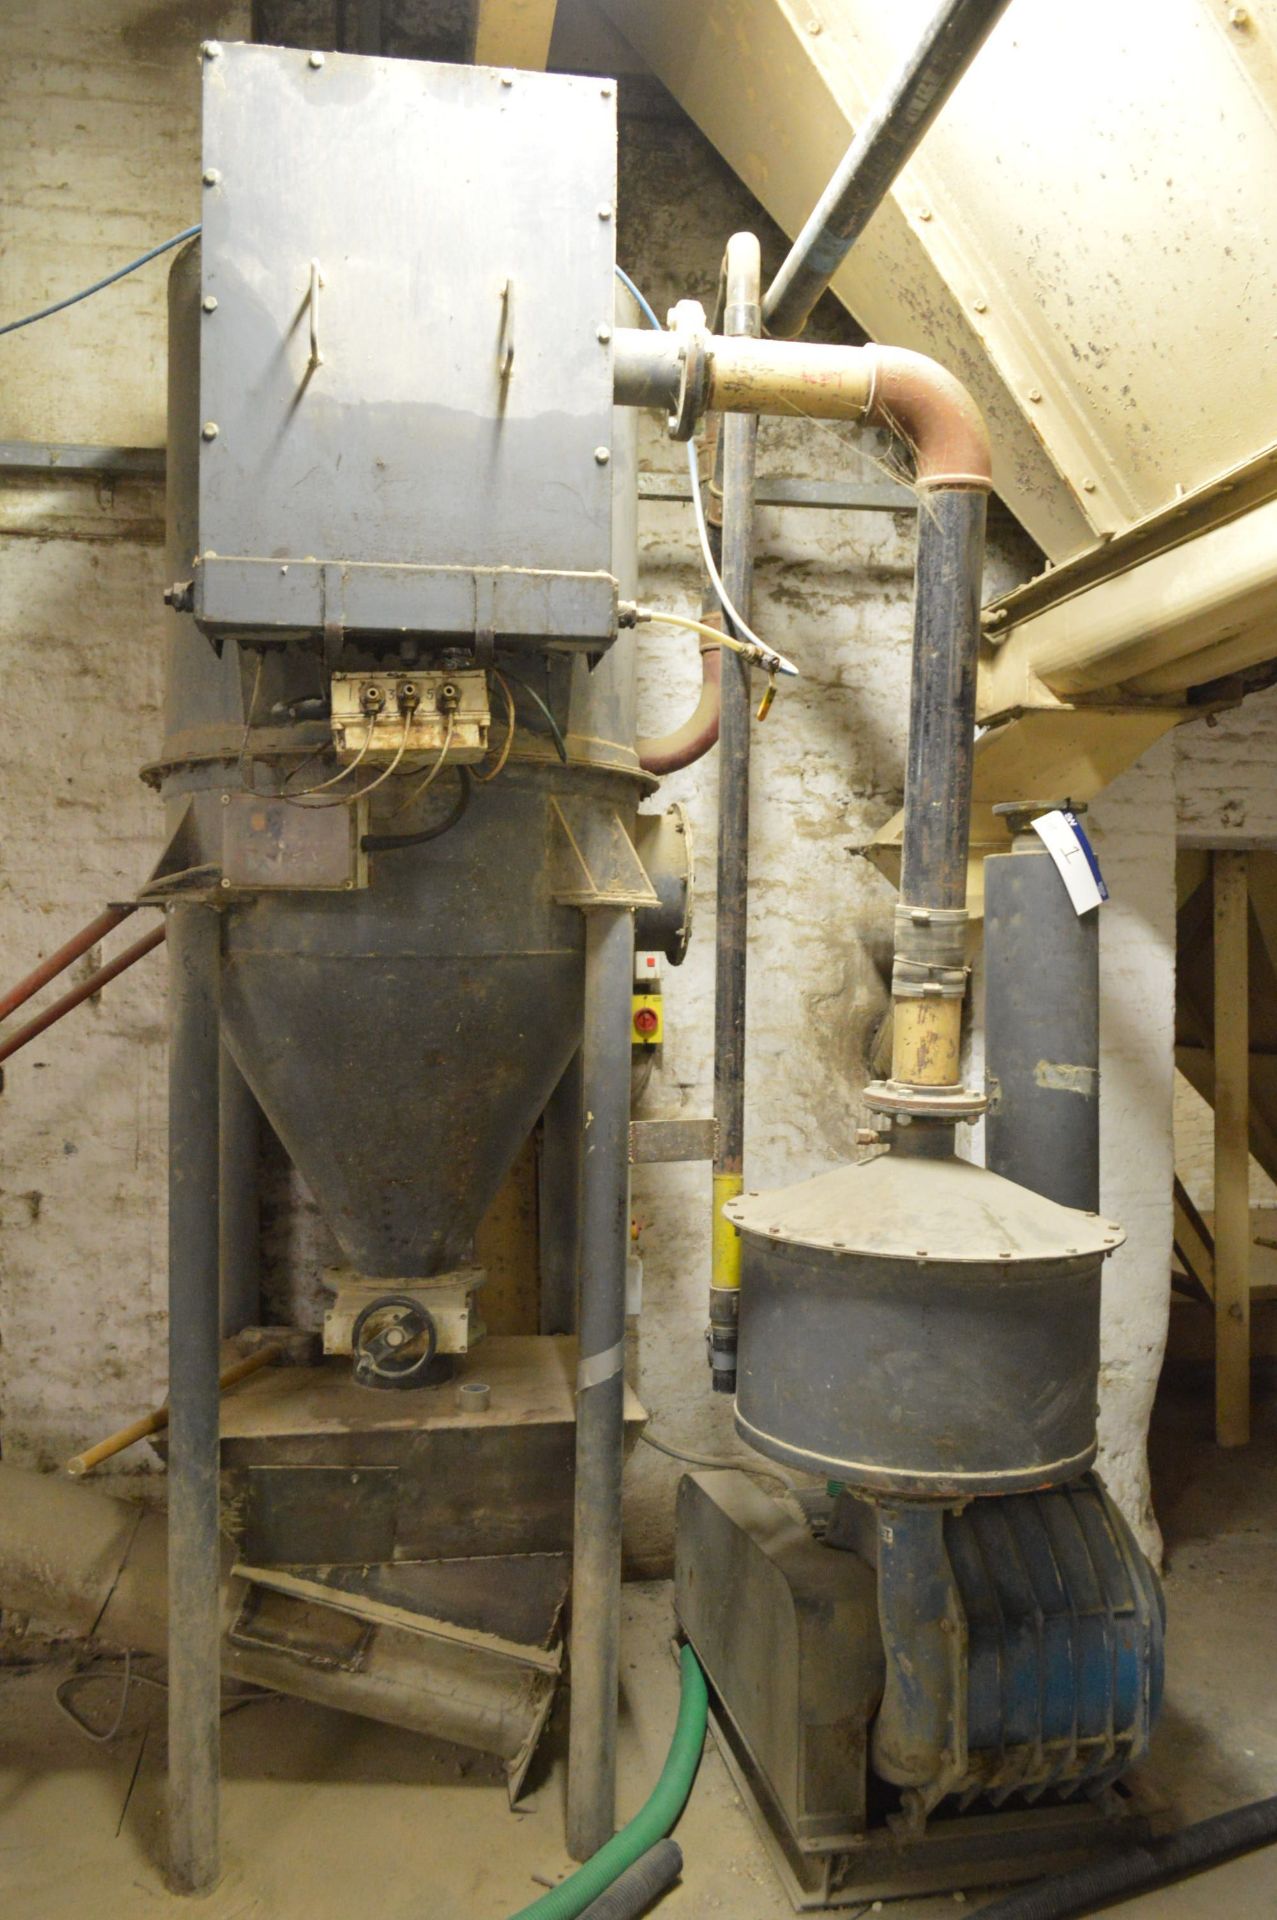 MILL CENTRAL VACUUM SYSTEM, with vacuum, filted11kW electric motor, receiver unit fitted filter, - Image 3 of 4